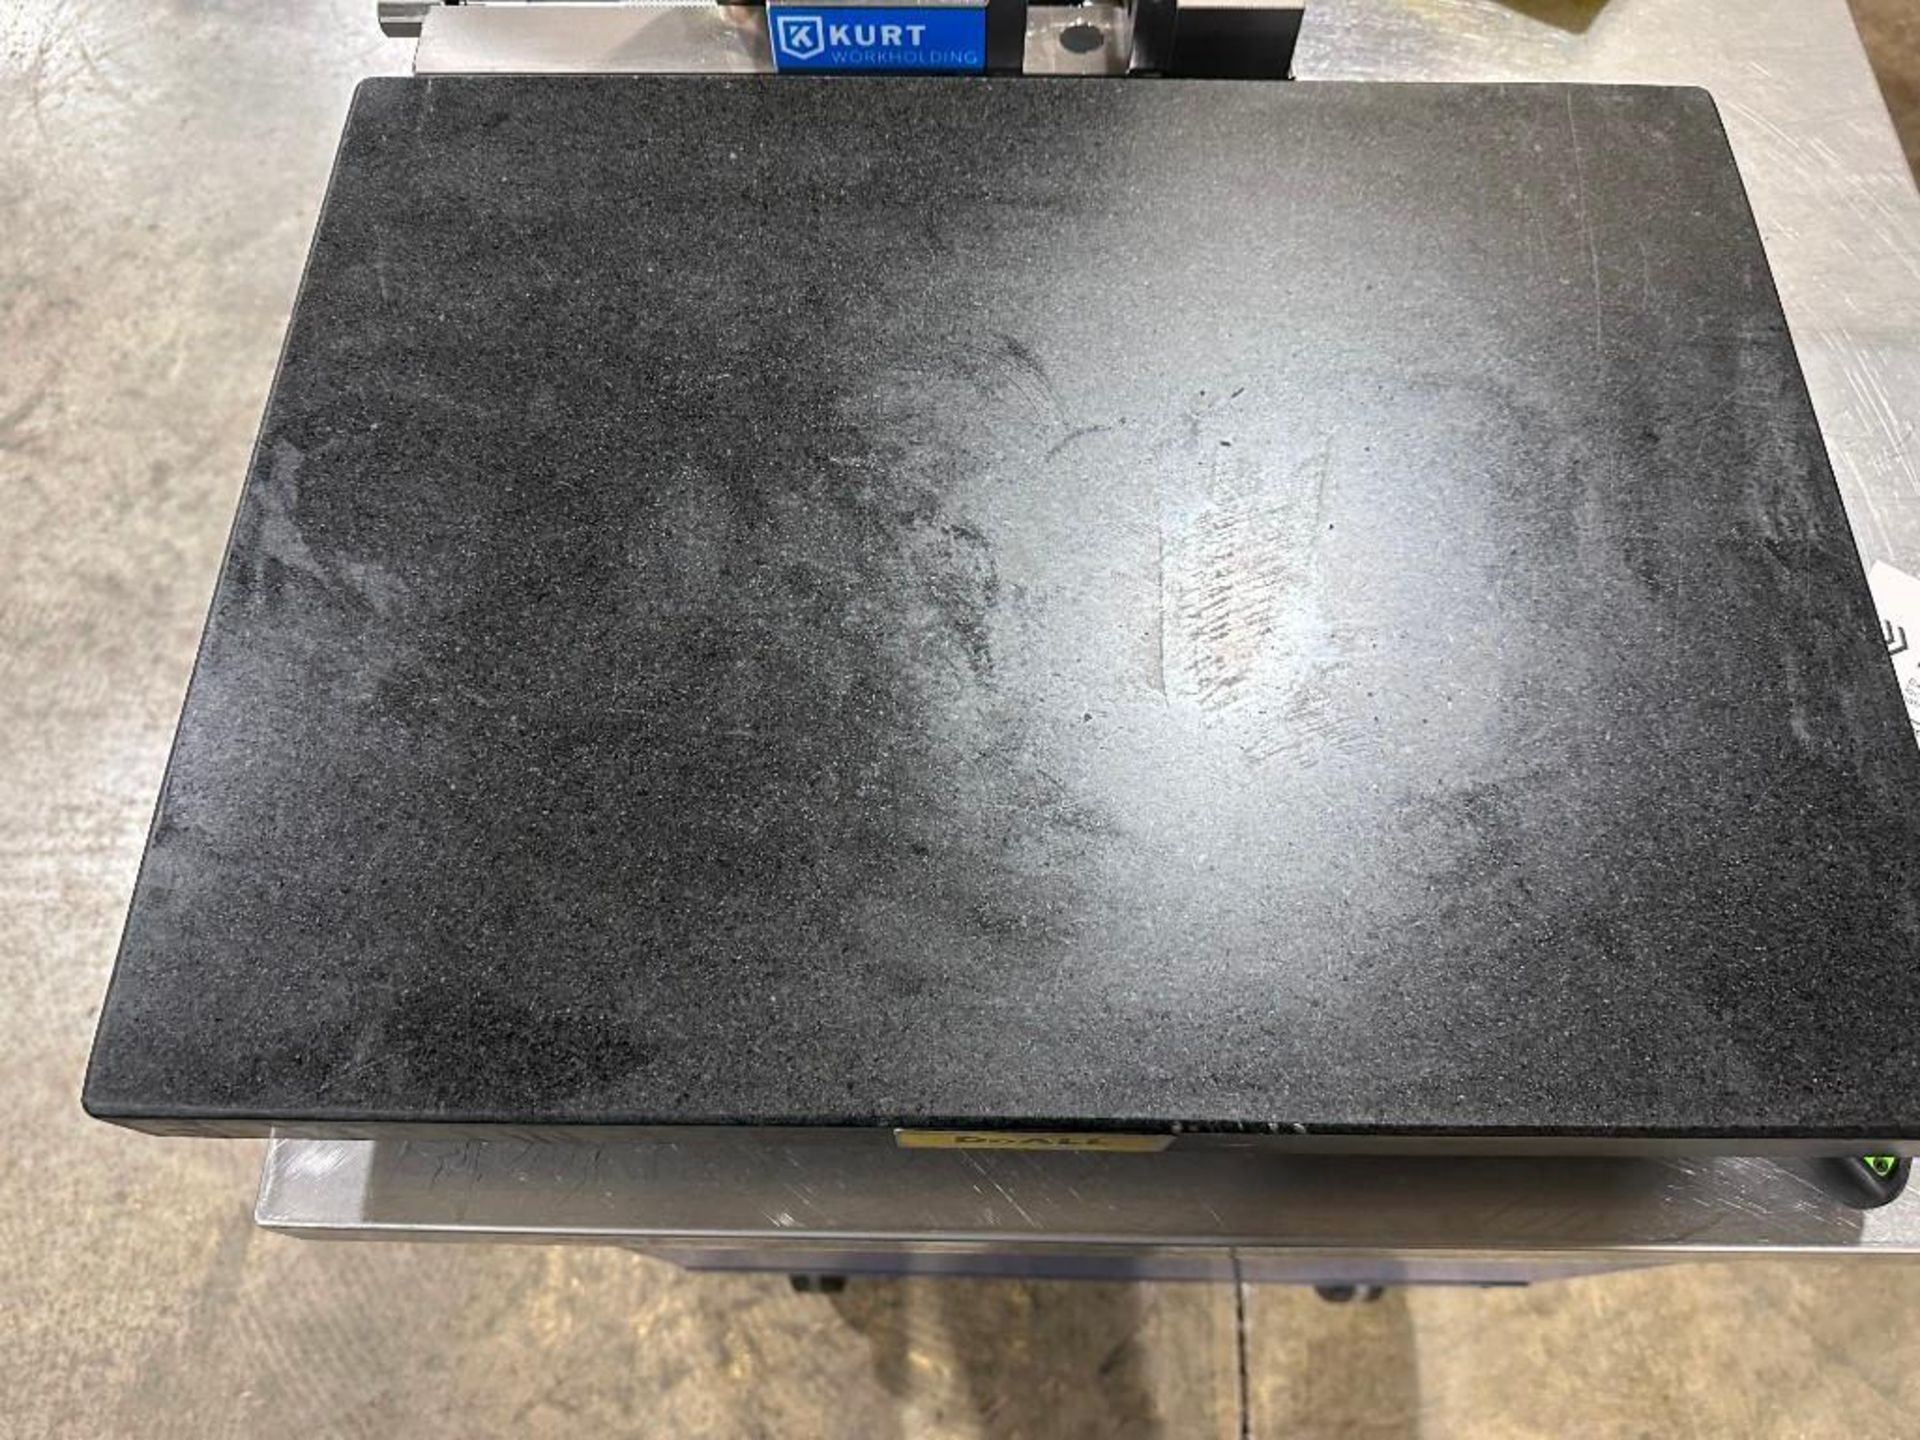 18" X 24" DOALL GRANITE INSPECTION SURFACE PLATE